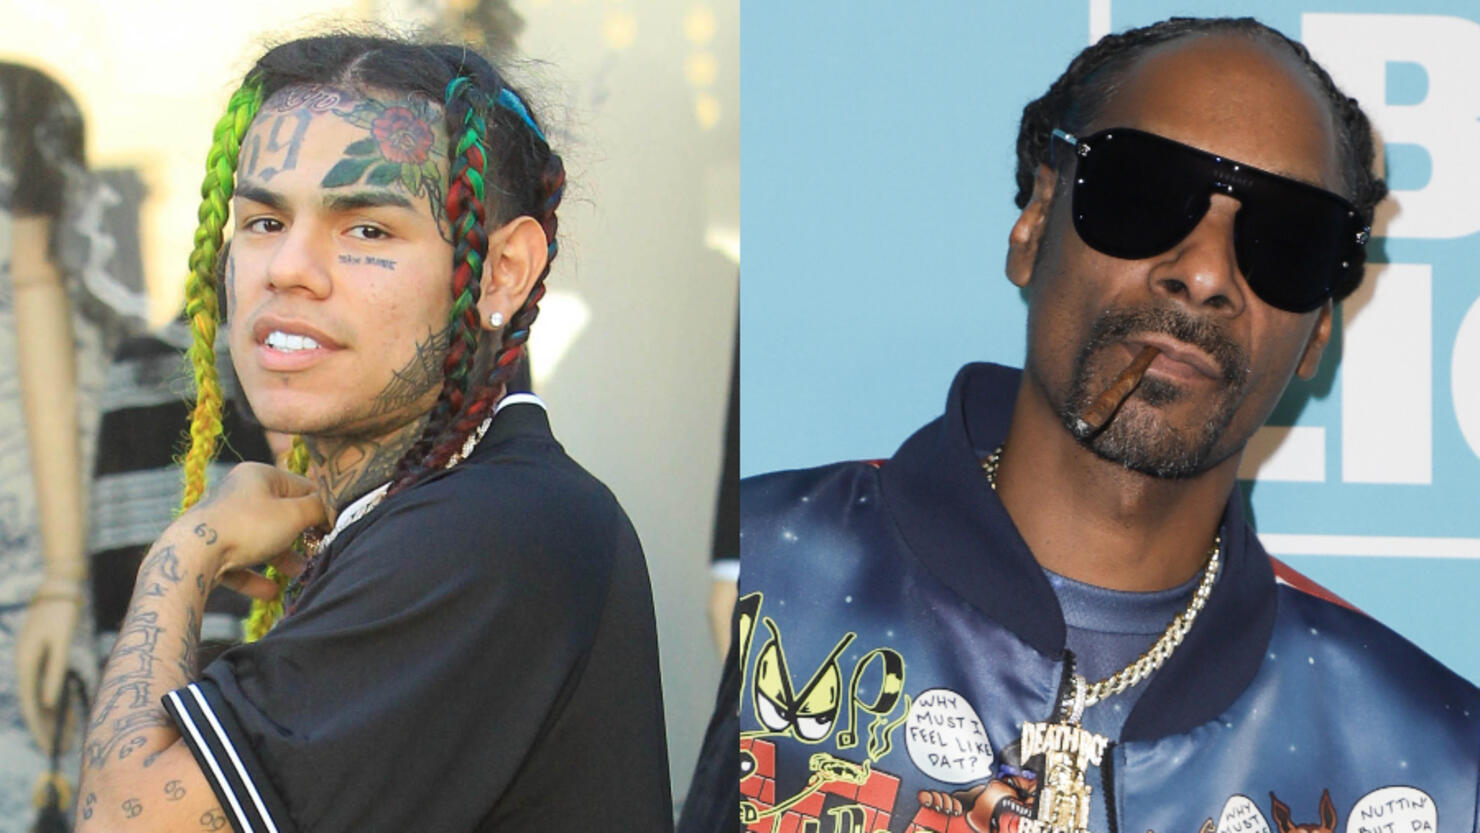 6ix9ine Accuses Snoop Dogg Of Being A Snitch, Snoop Responds | iHeart